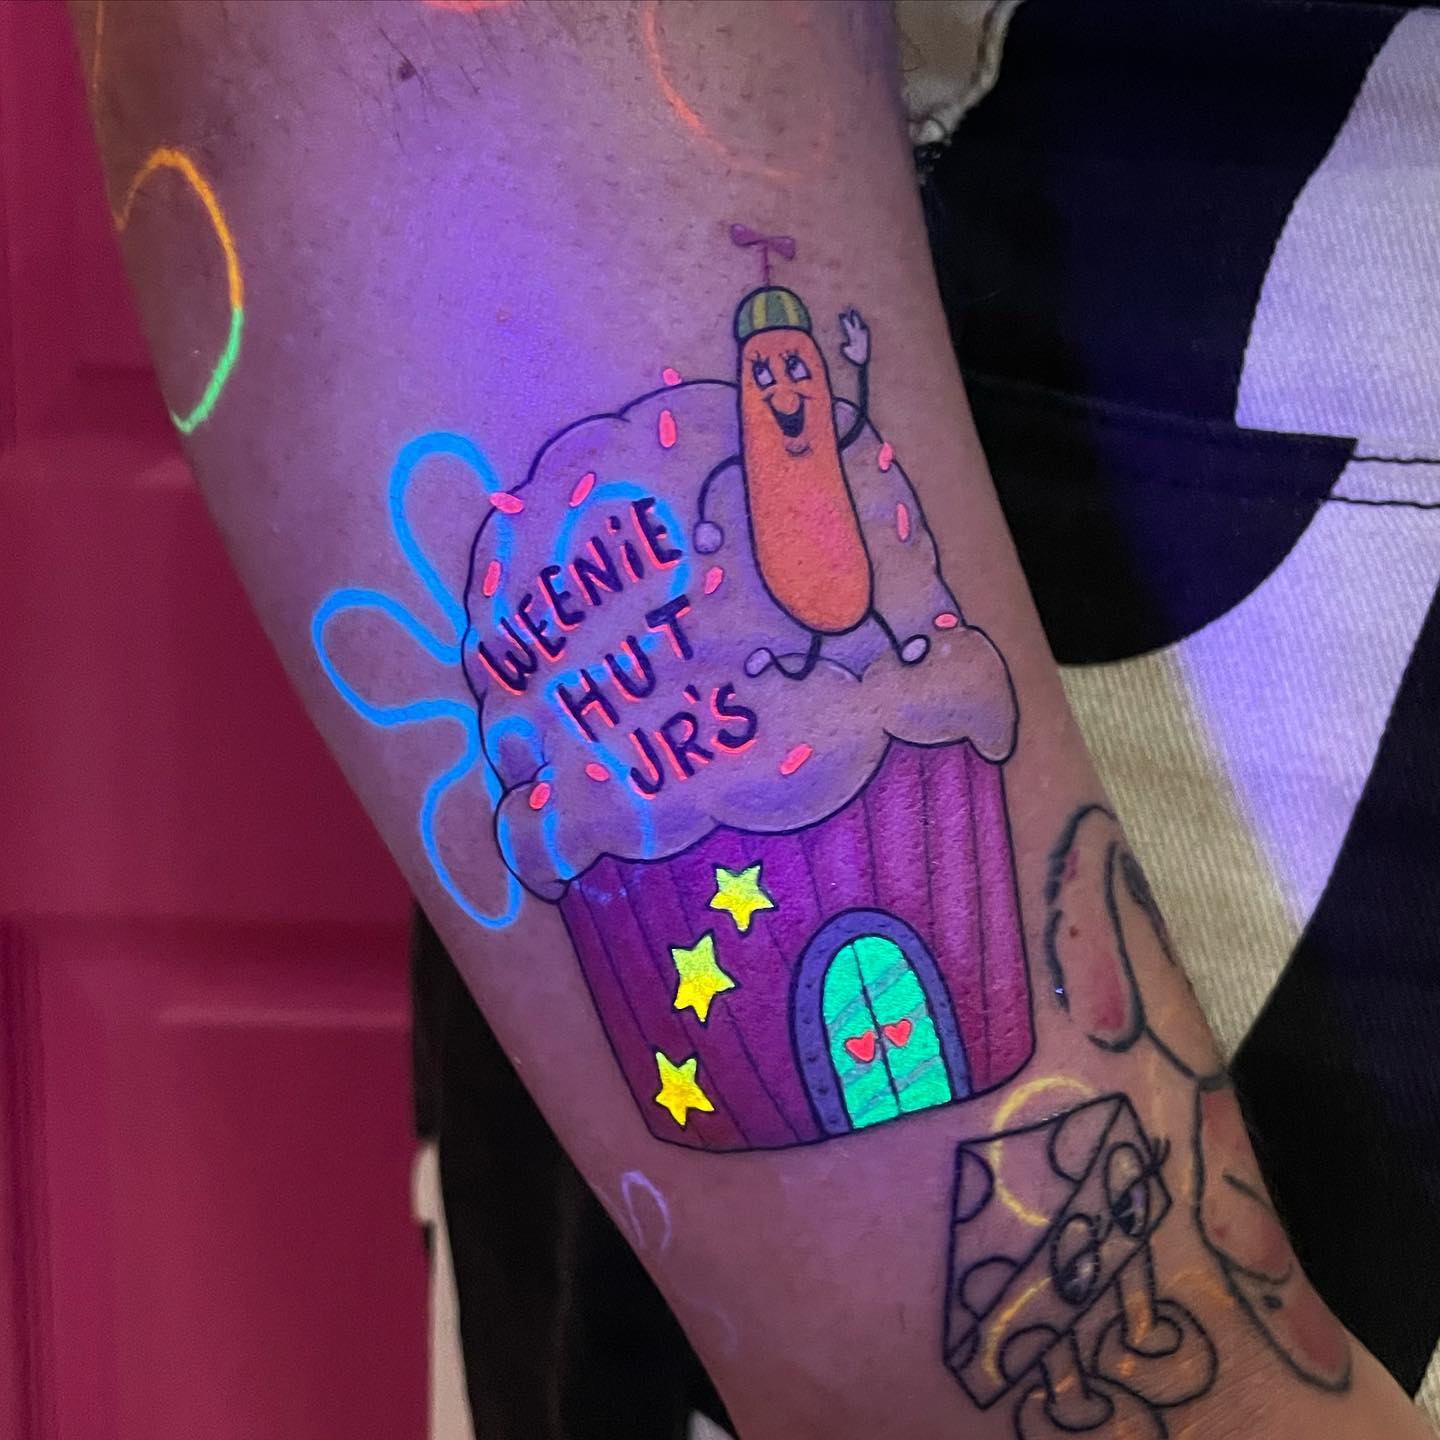 Colorful tattoo ideas for men by 0uchless